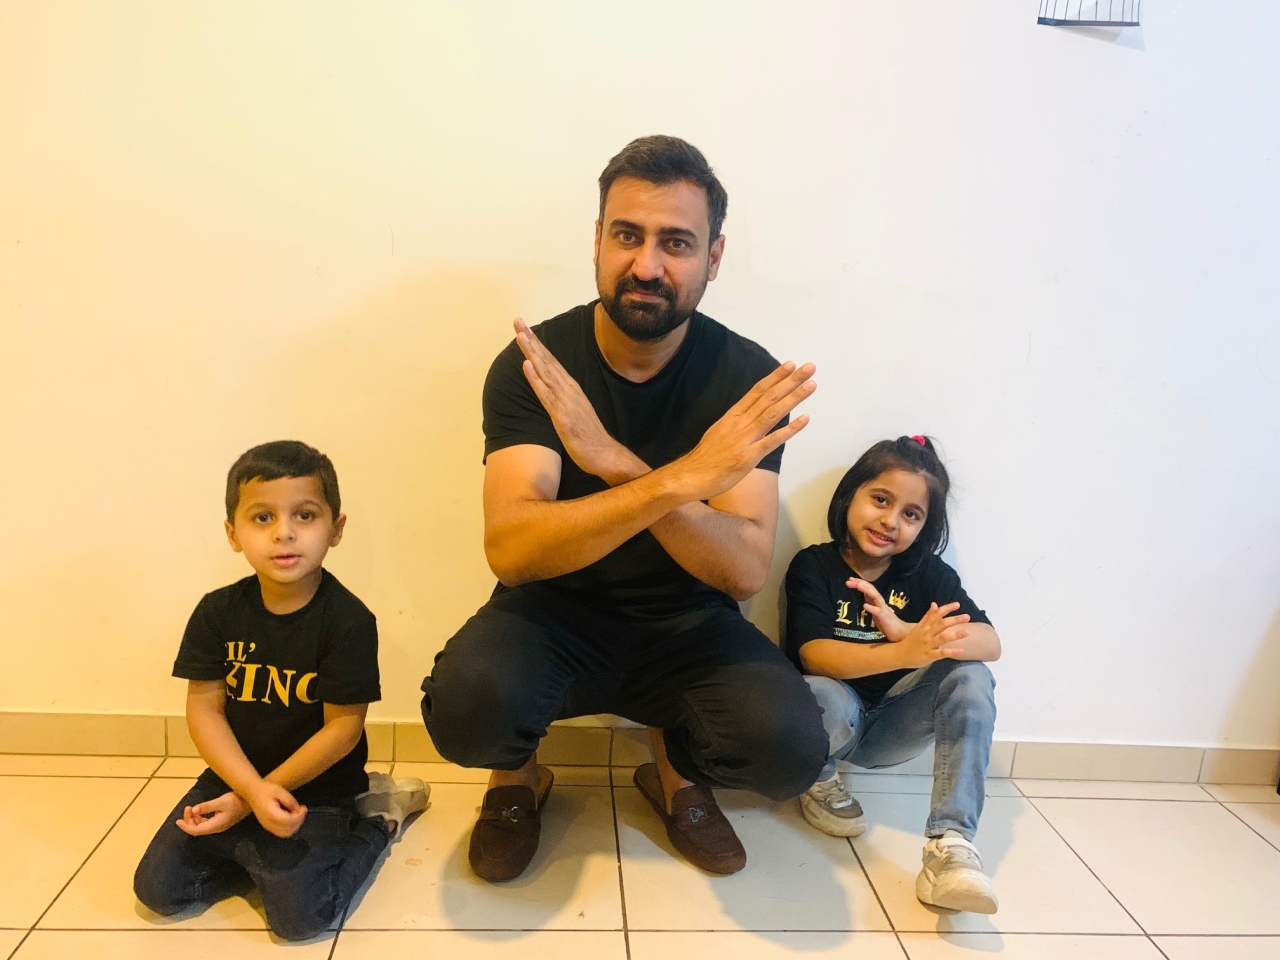 Man and two children in black t-shirts crossing their arms